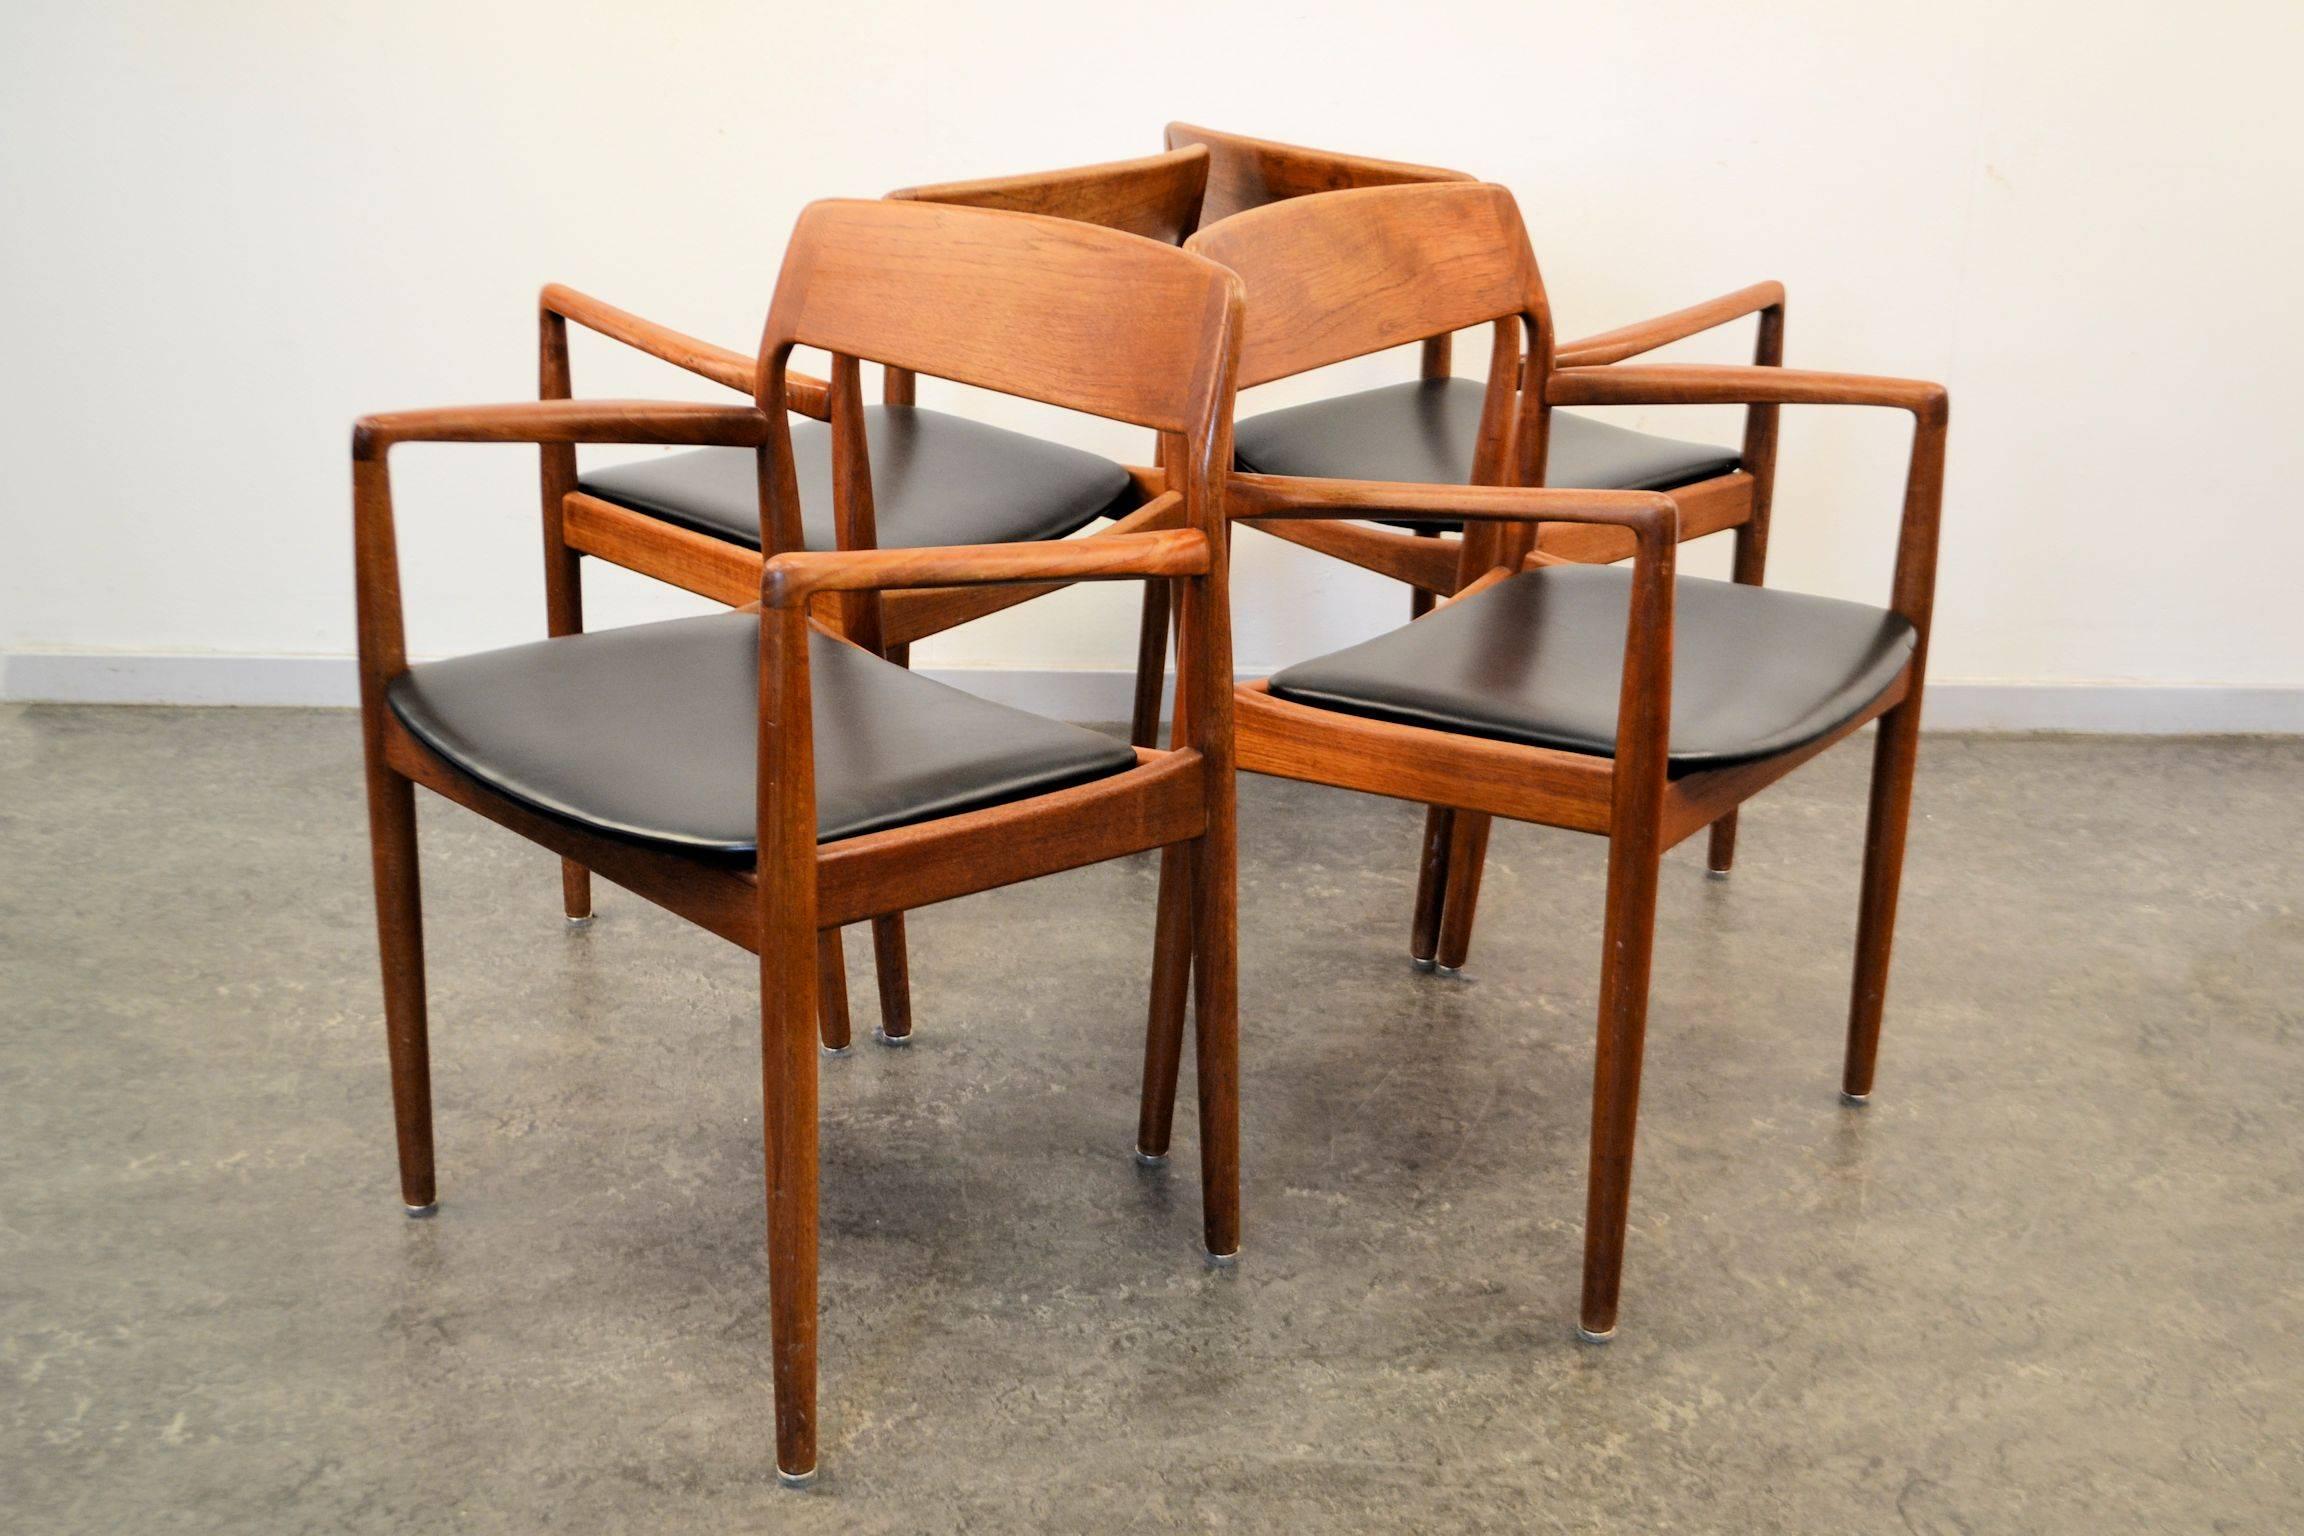 Set of four Danish design teak chairs with massive teak armrests and backrests.
The chairs were manufactured in Denmark during the 1950s-1960s. These chairs could have been designed by Niels O. Møller.
Under each chair is a brand: 